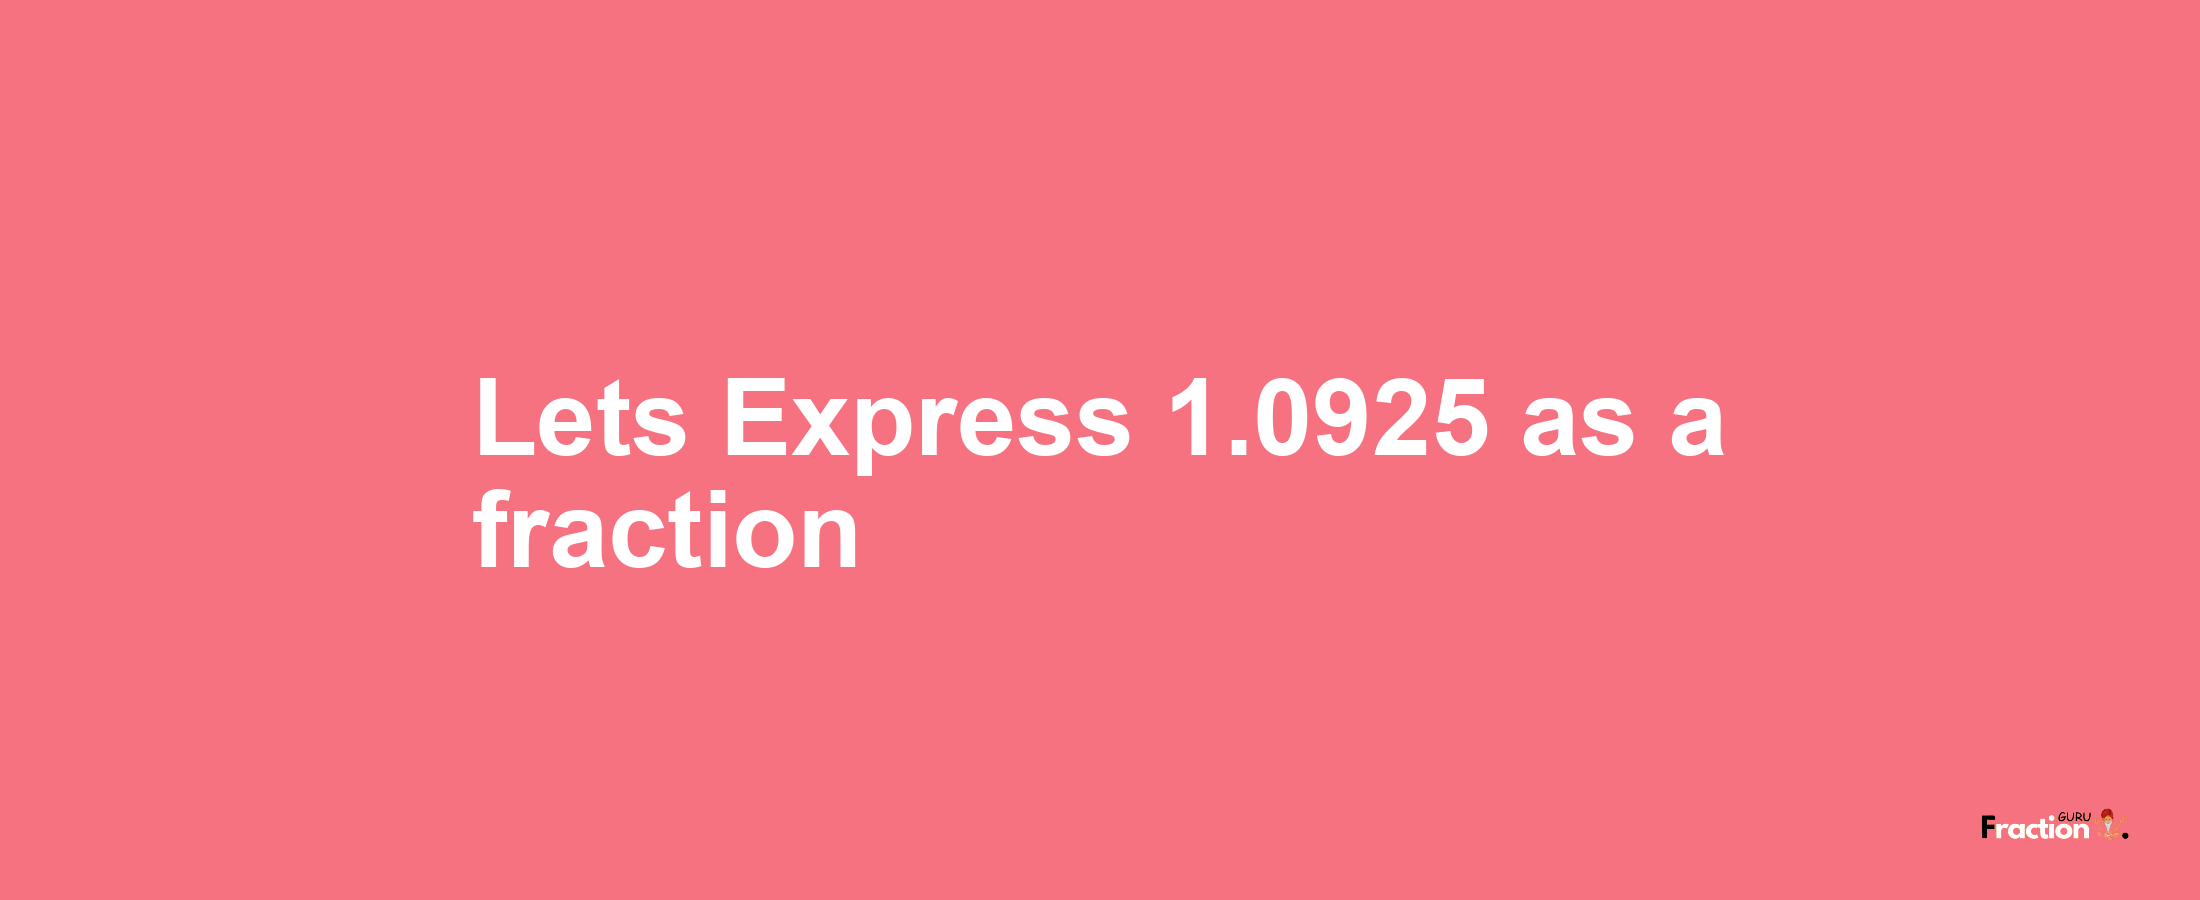 Lets Express 1.0925 as afraction